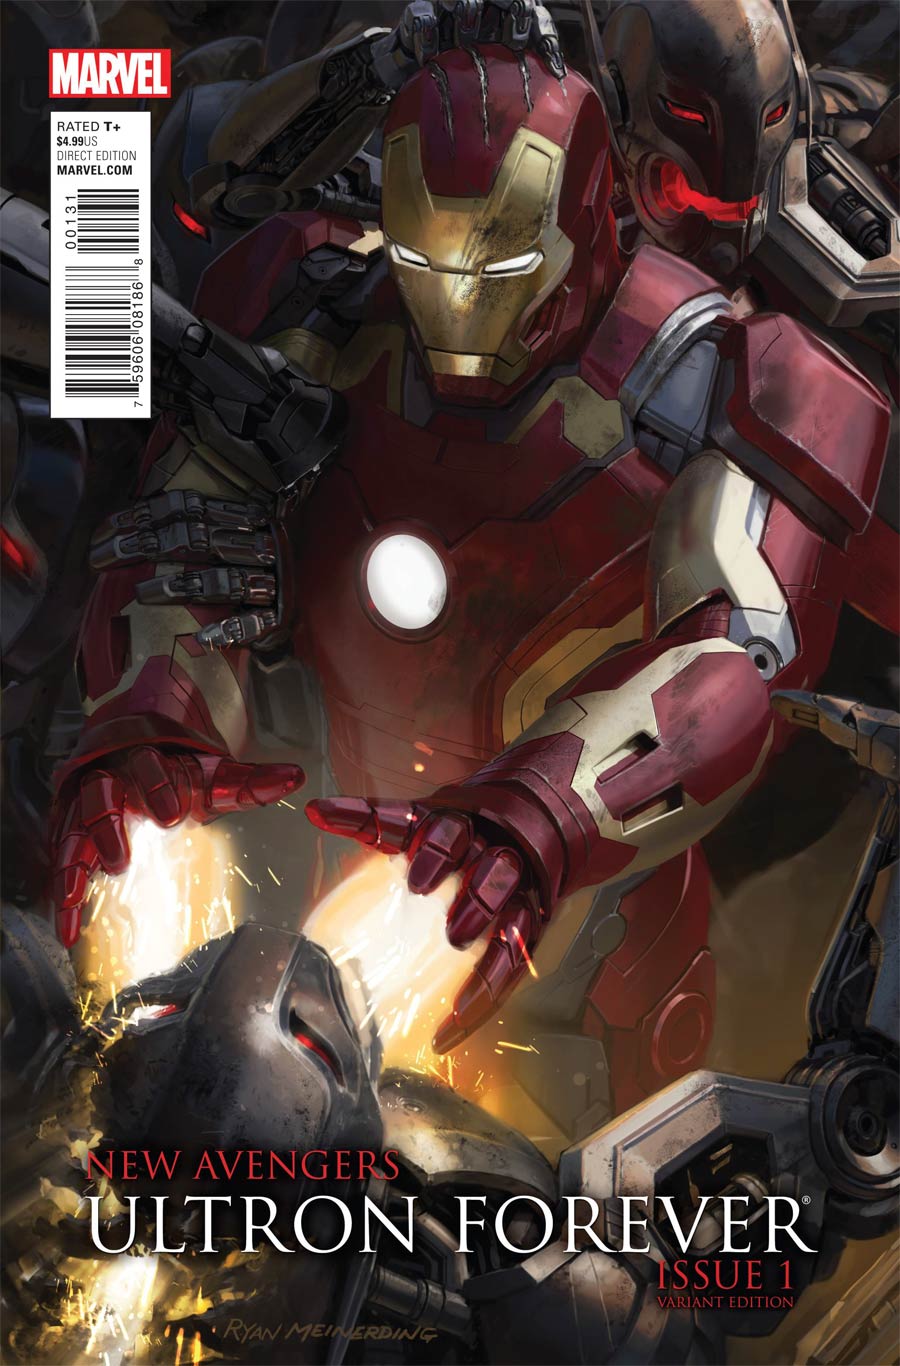 New Avengers Ultron Forever #1 Cover C Incentive Avengers Age Of Ultron Movie Connecting F Variant Cover (Ultron Forever Part 2)